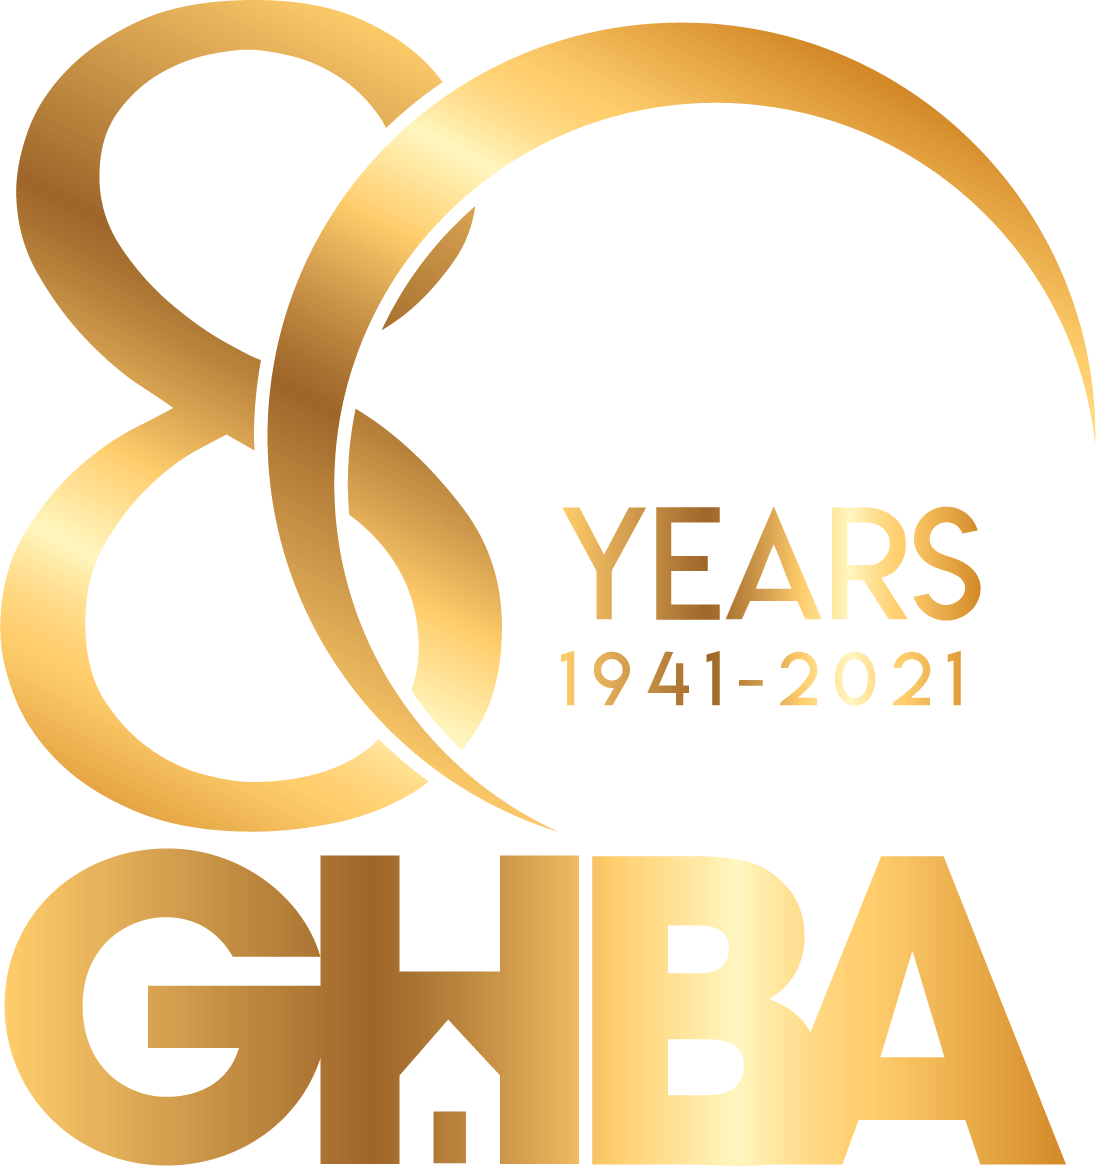 The Greater Houston Builders Association’s logo and the text “80 Years 1941-2021” in gold with a black background